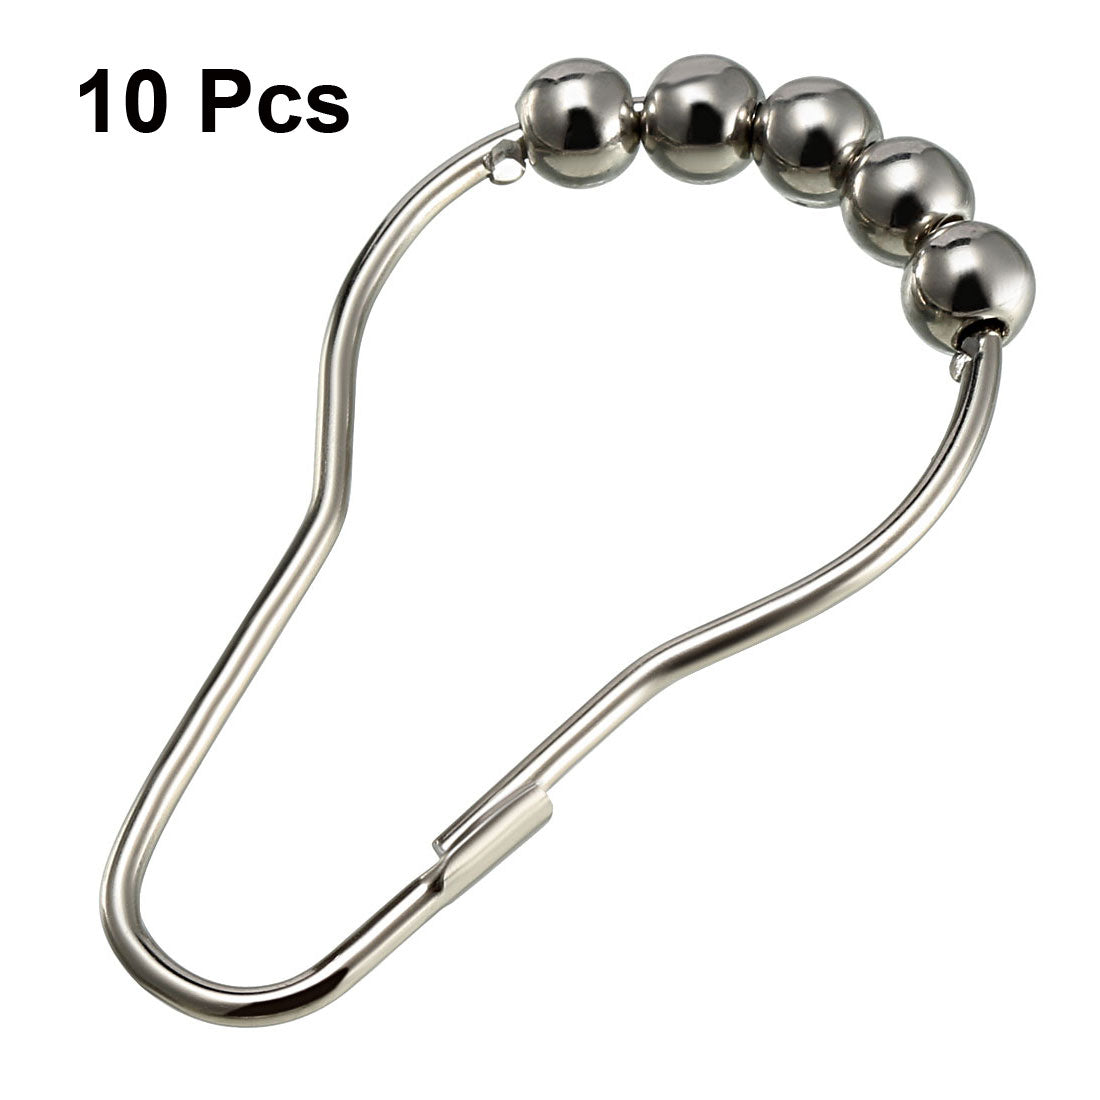 uxcell Uxcell Shower Curtain Ring Hooks Metal for Bathroom Shower Rods Curtains Liners Iron Ball 10 Pcs